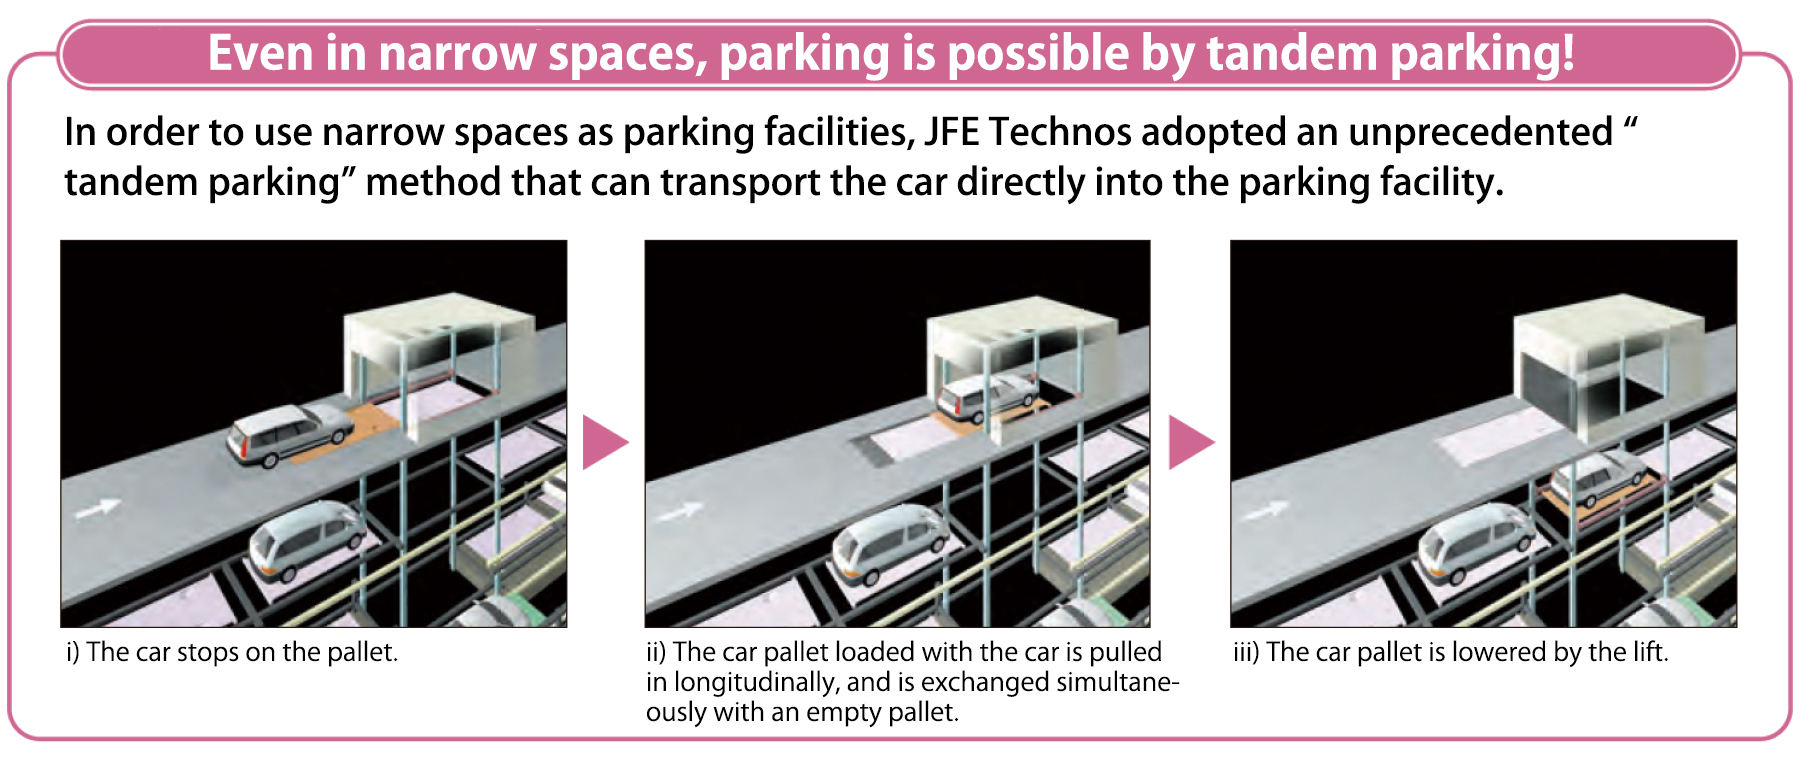 Even in narrow spaces, parking is possible by tandem parking!